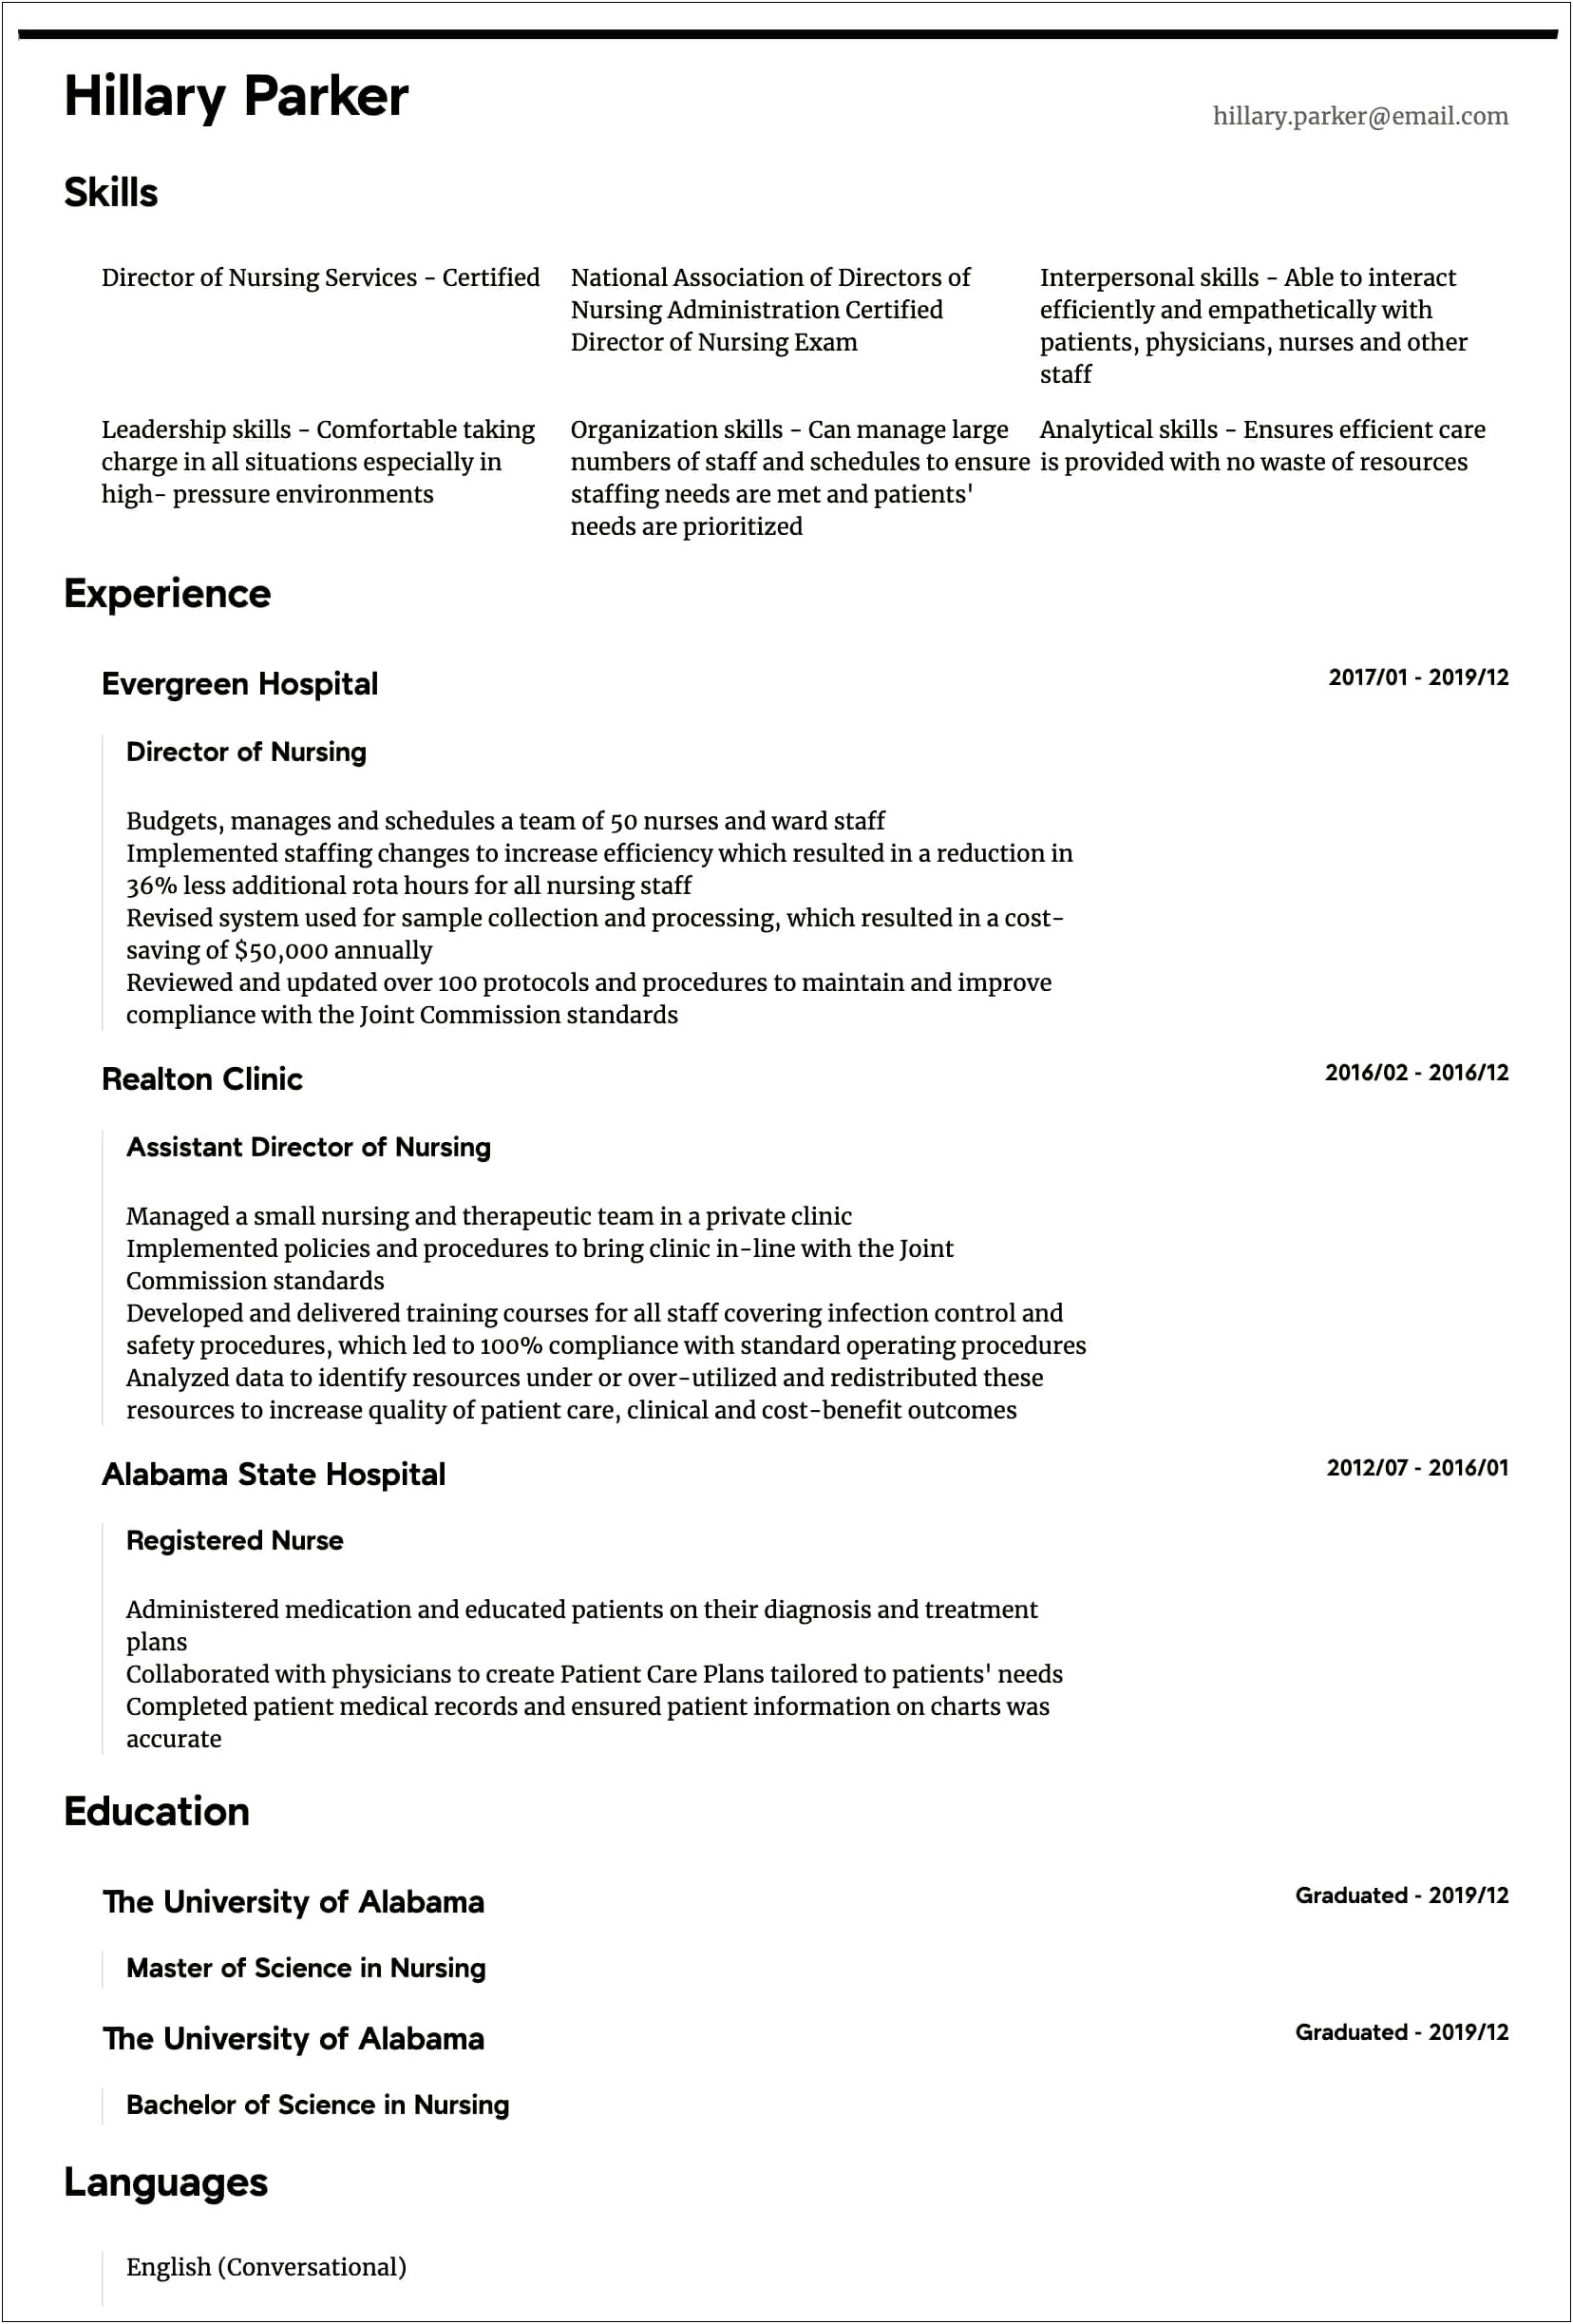 Creating A Resume For 36 Years Of Experience